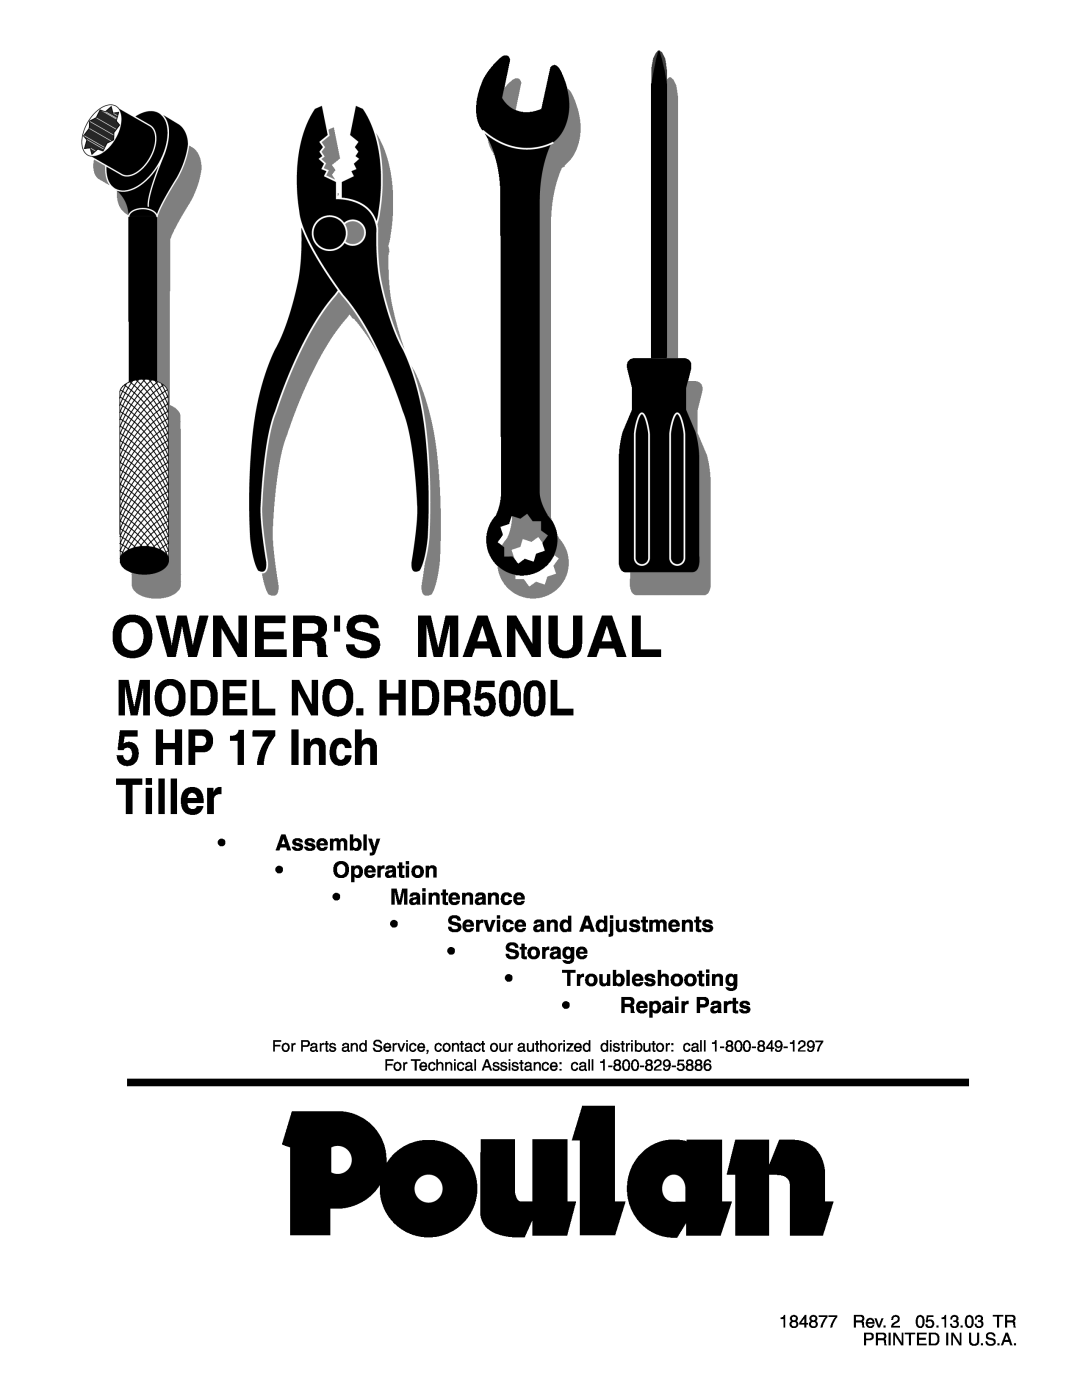 Poulan owner manual Owners Manual, MODEL NO. HDR500L 5 HP 17 Inch Tiller, Troubleshooting Repair Parts 